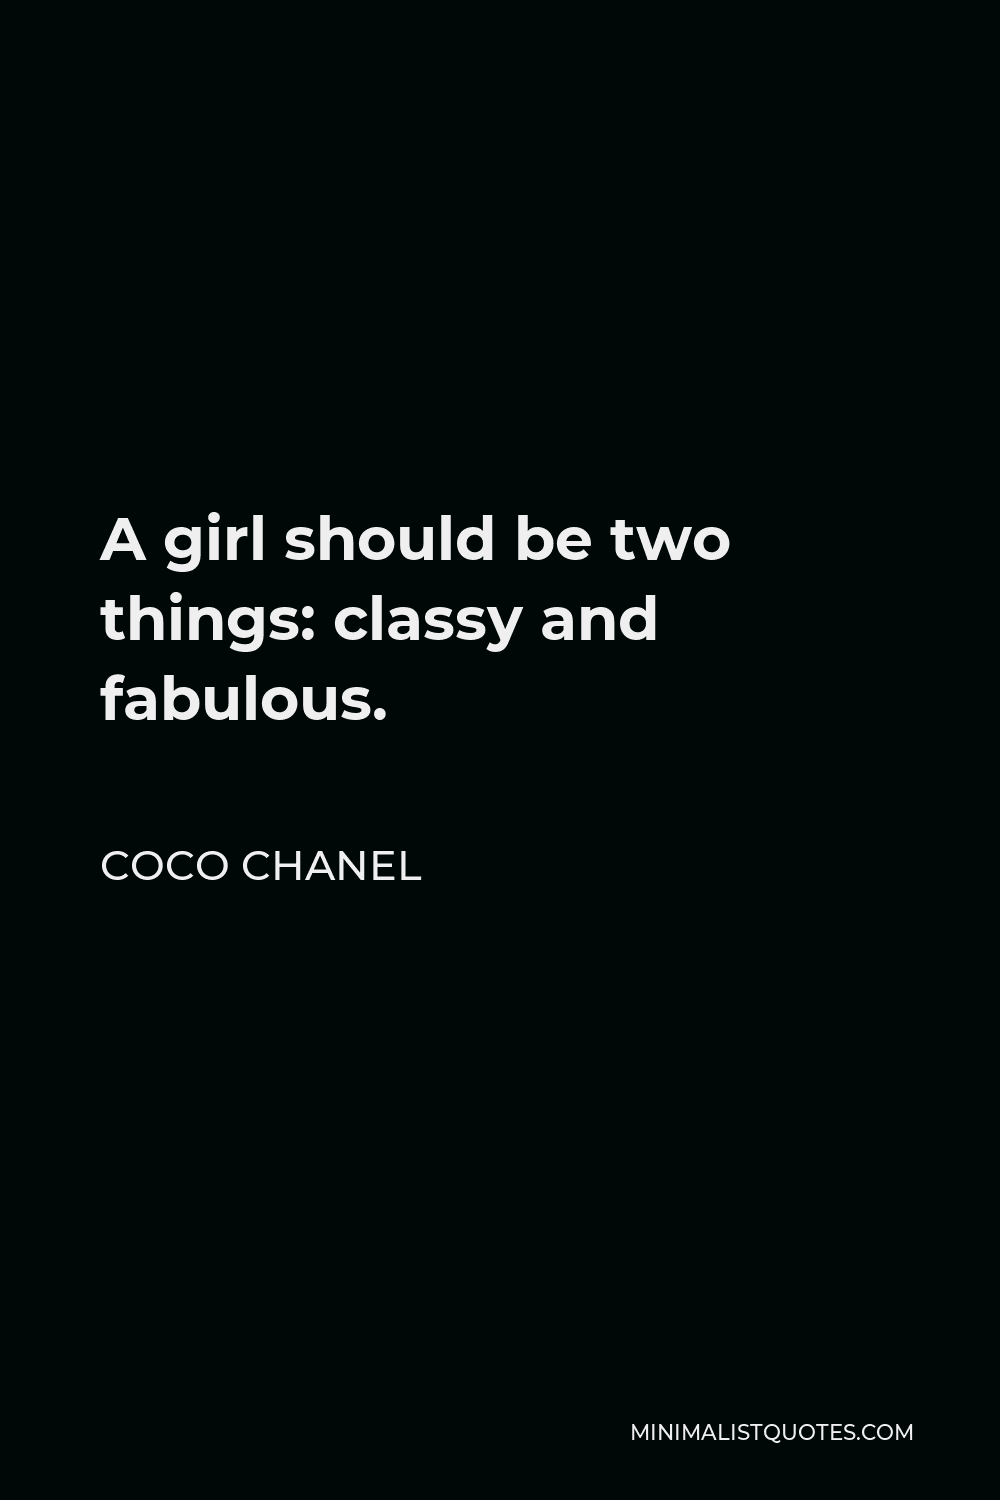 A Girl Should Be Two Things, Classy & FabulousCoco Chanel Pictures,  Photos, and Images for Facebook, Tumblr, Pinterest, and Twitter